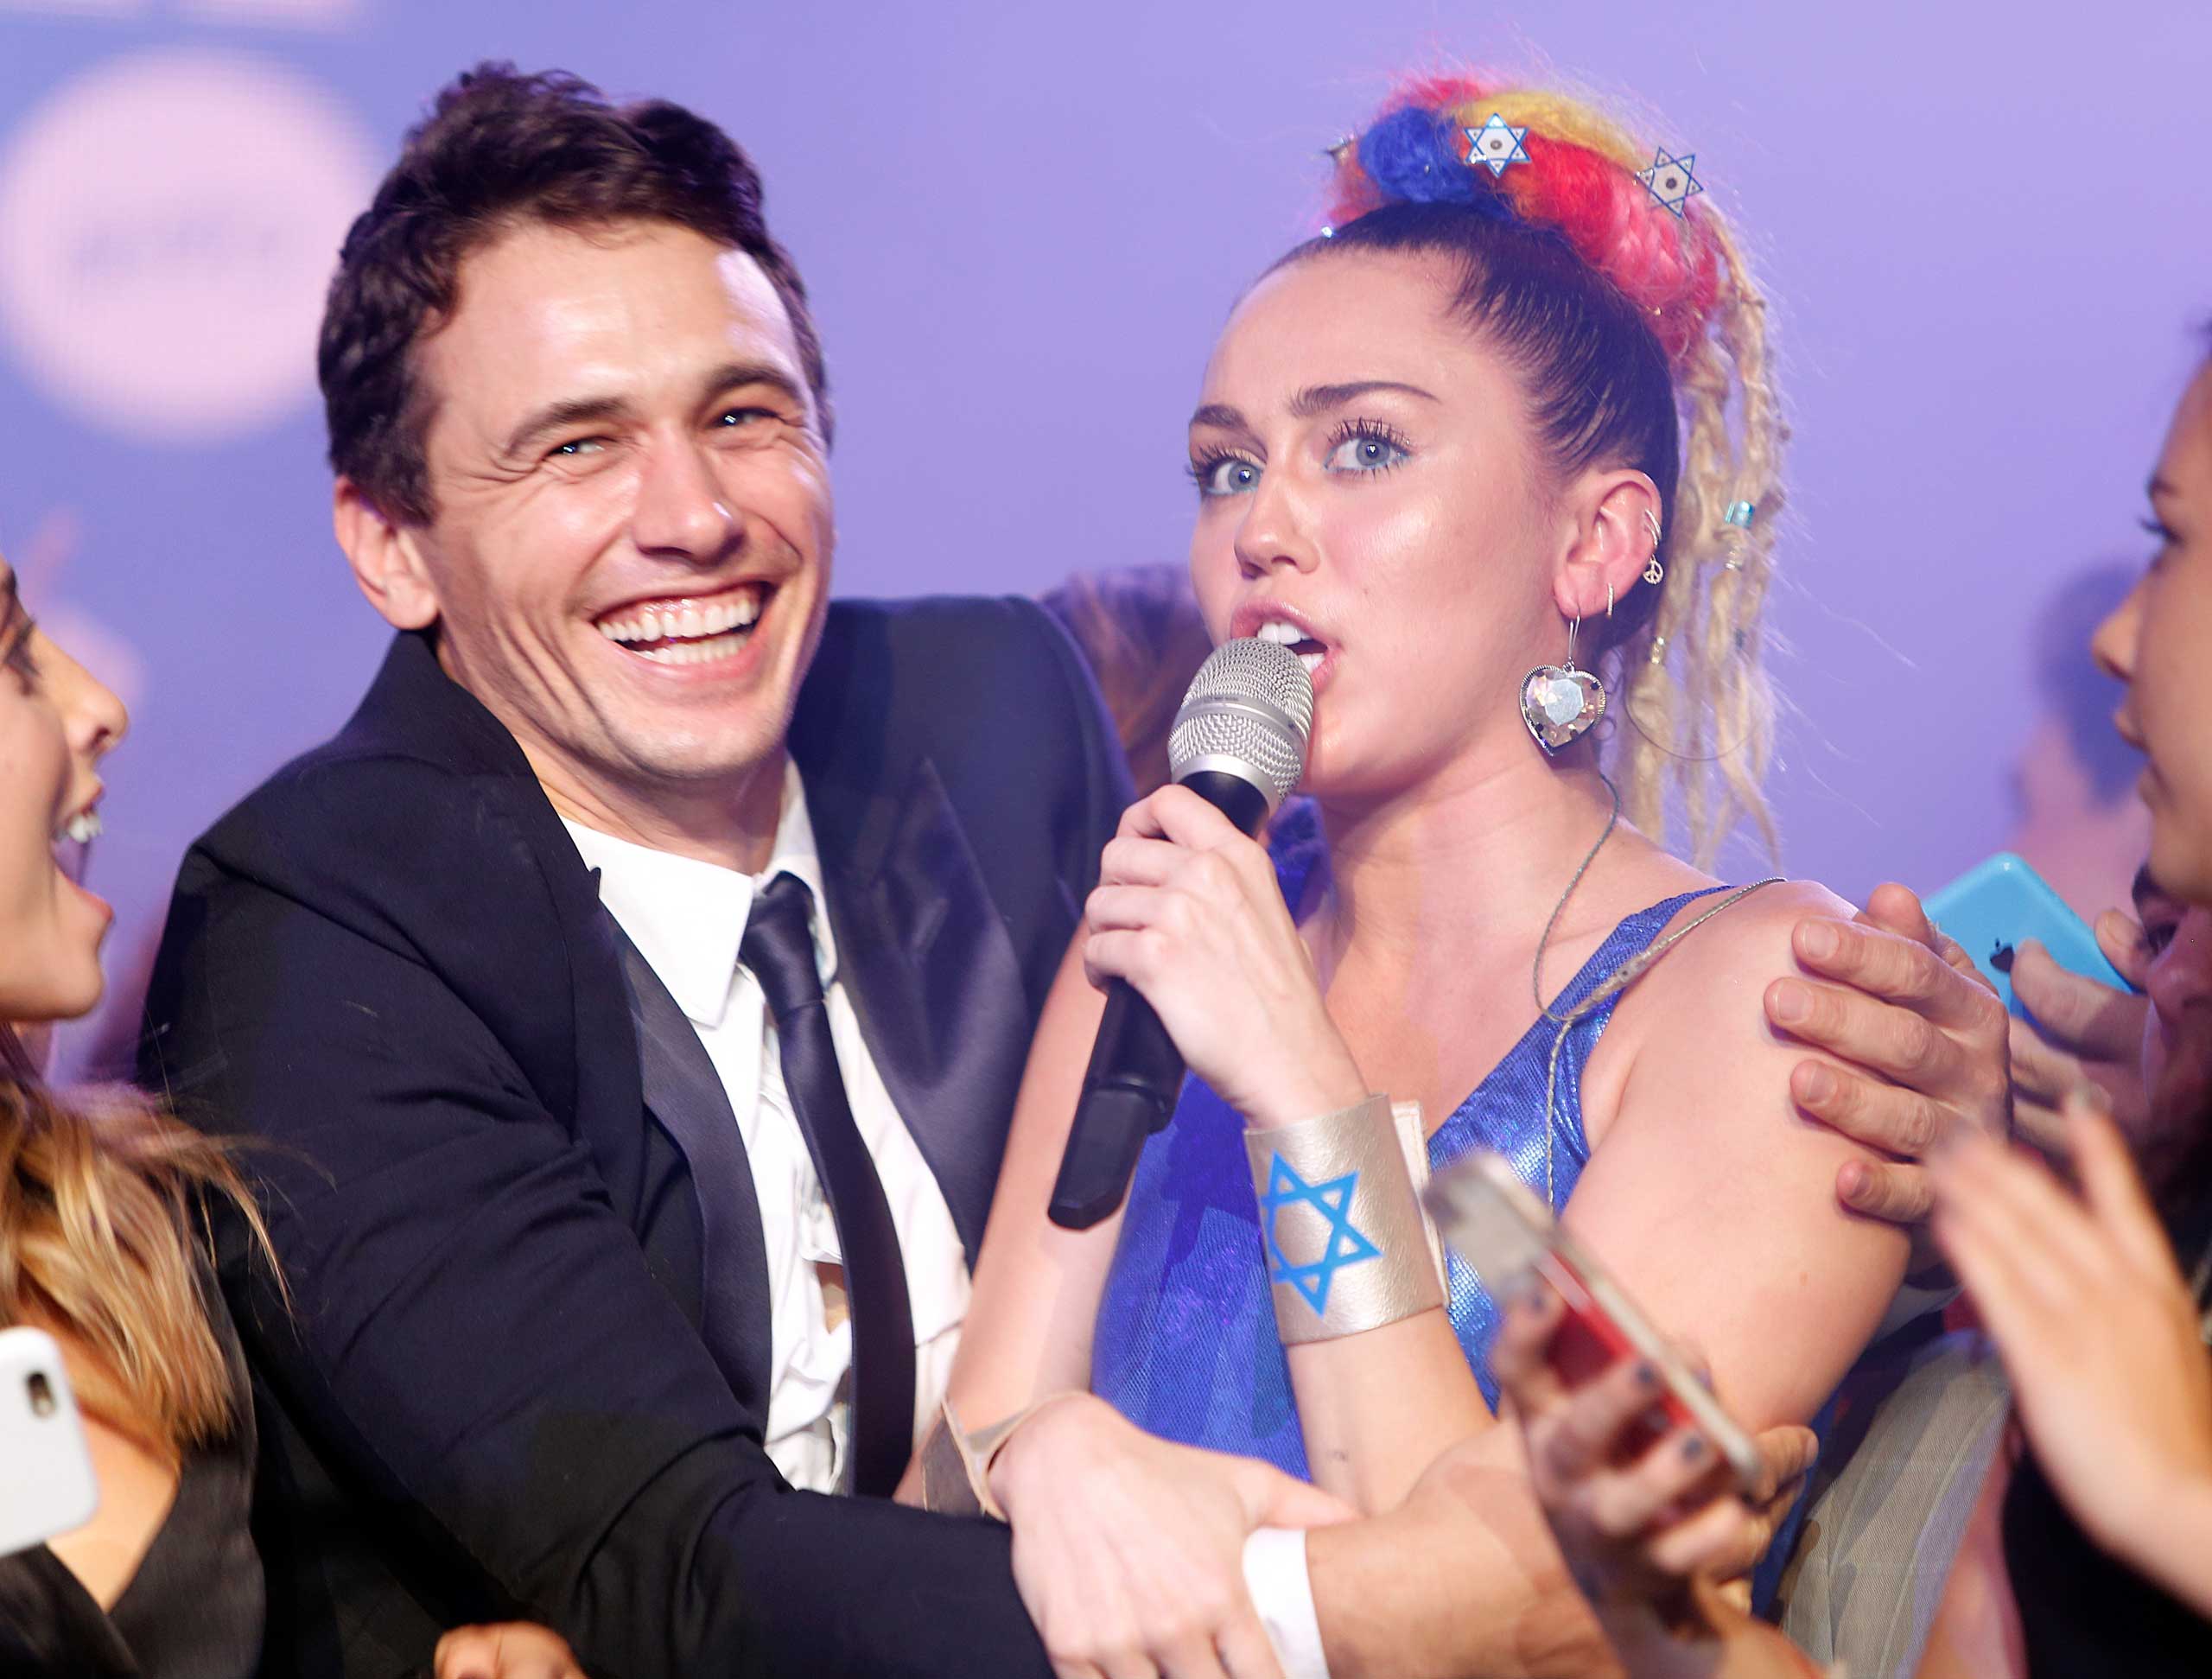 Actor James Franco (L) and musician Miley Cyrus perform onstage during Hilarity for Charity's Annual Variety Show: James Franco's Bar Mitzvah at the Hollywood Palladium in Los Angeles, on Oct. 17, 2015. (Randy Shropshire—Getty Images)